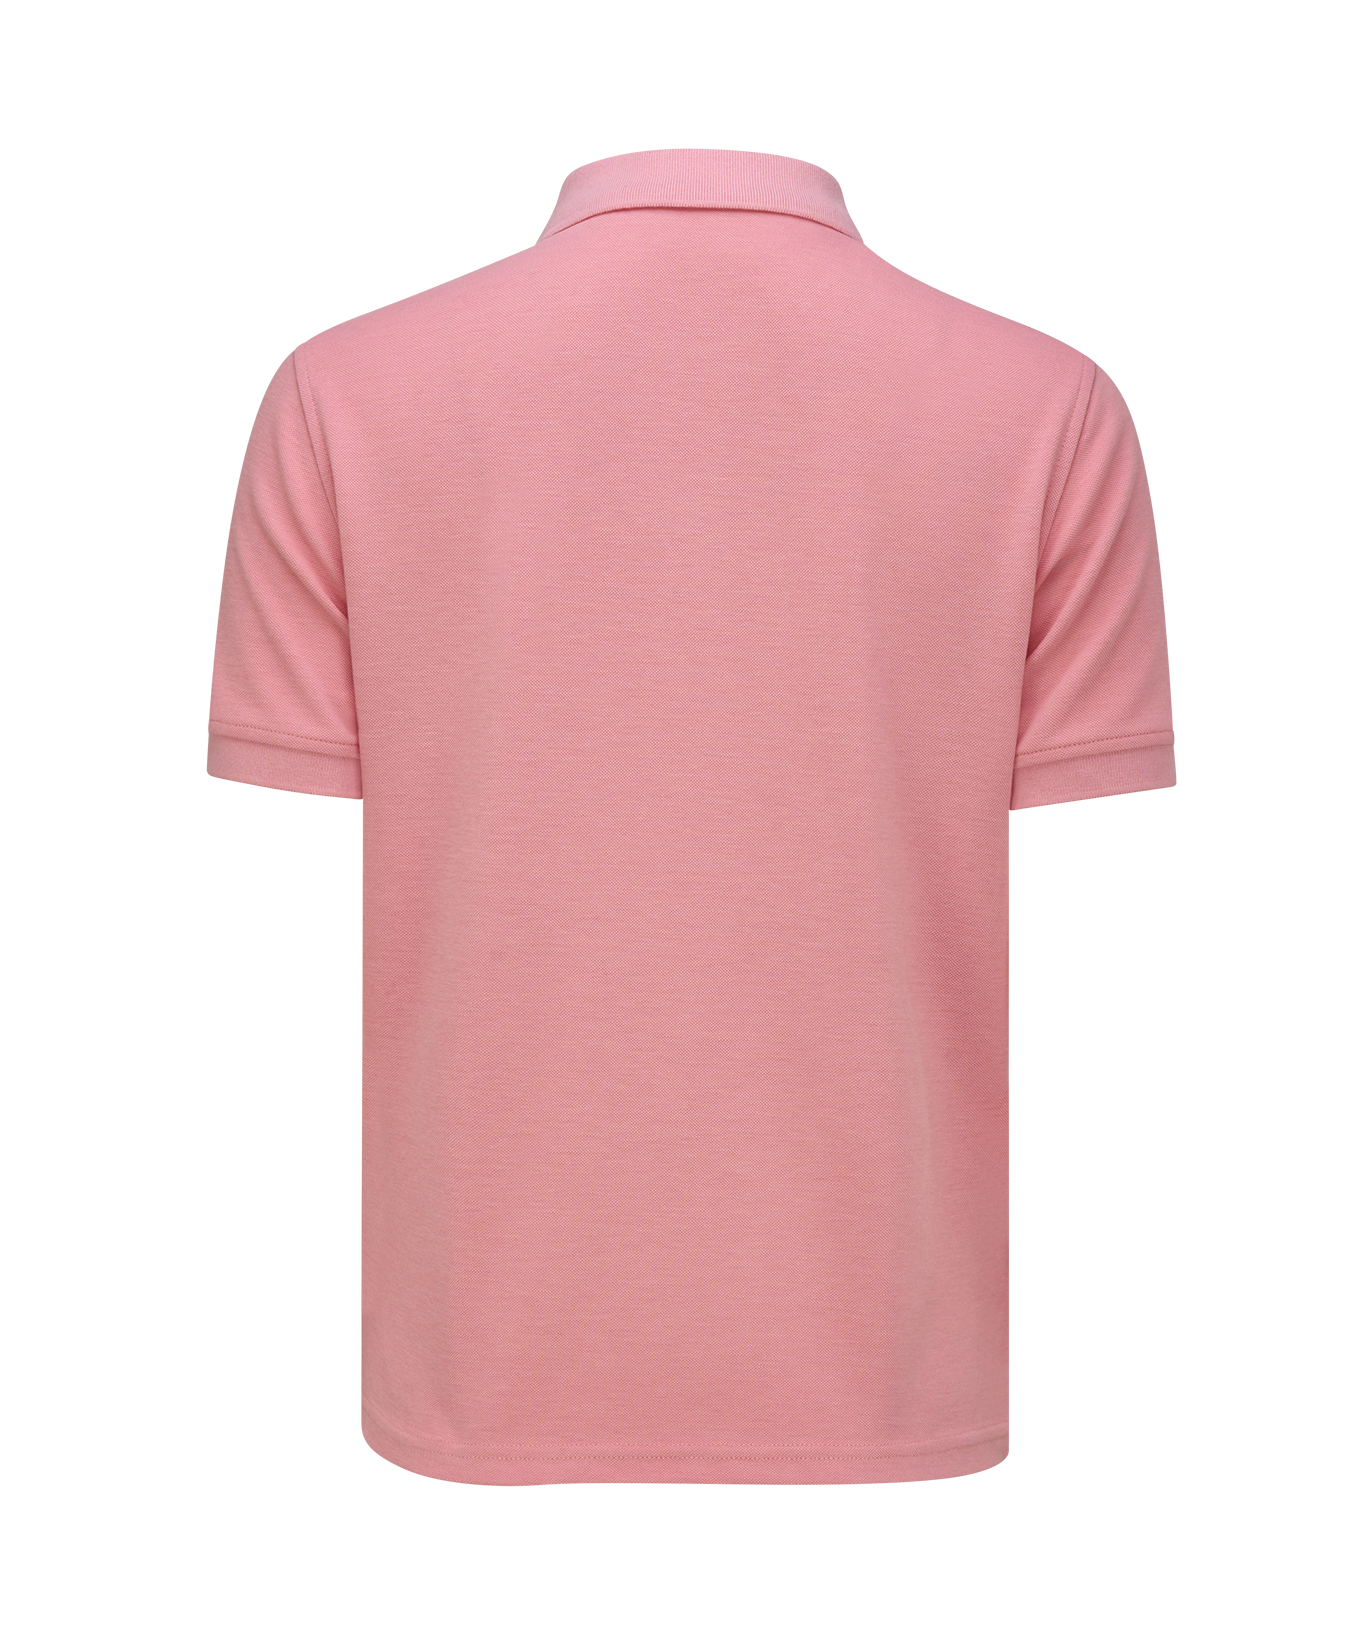 Dianthis Pink Eastside Golf Womens Classic Pique Polo